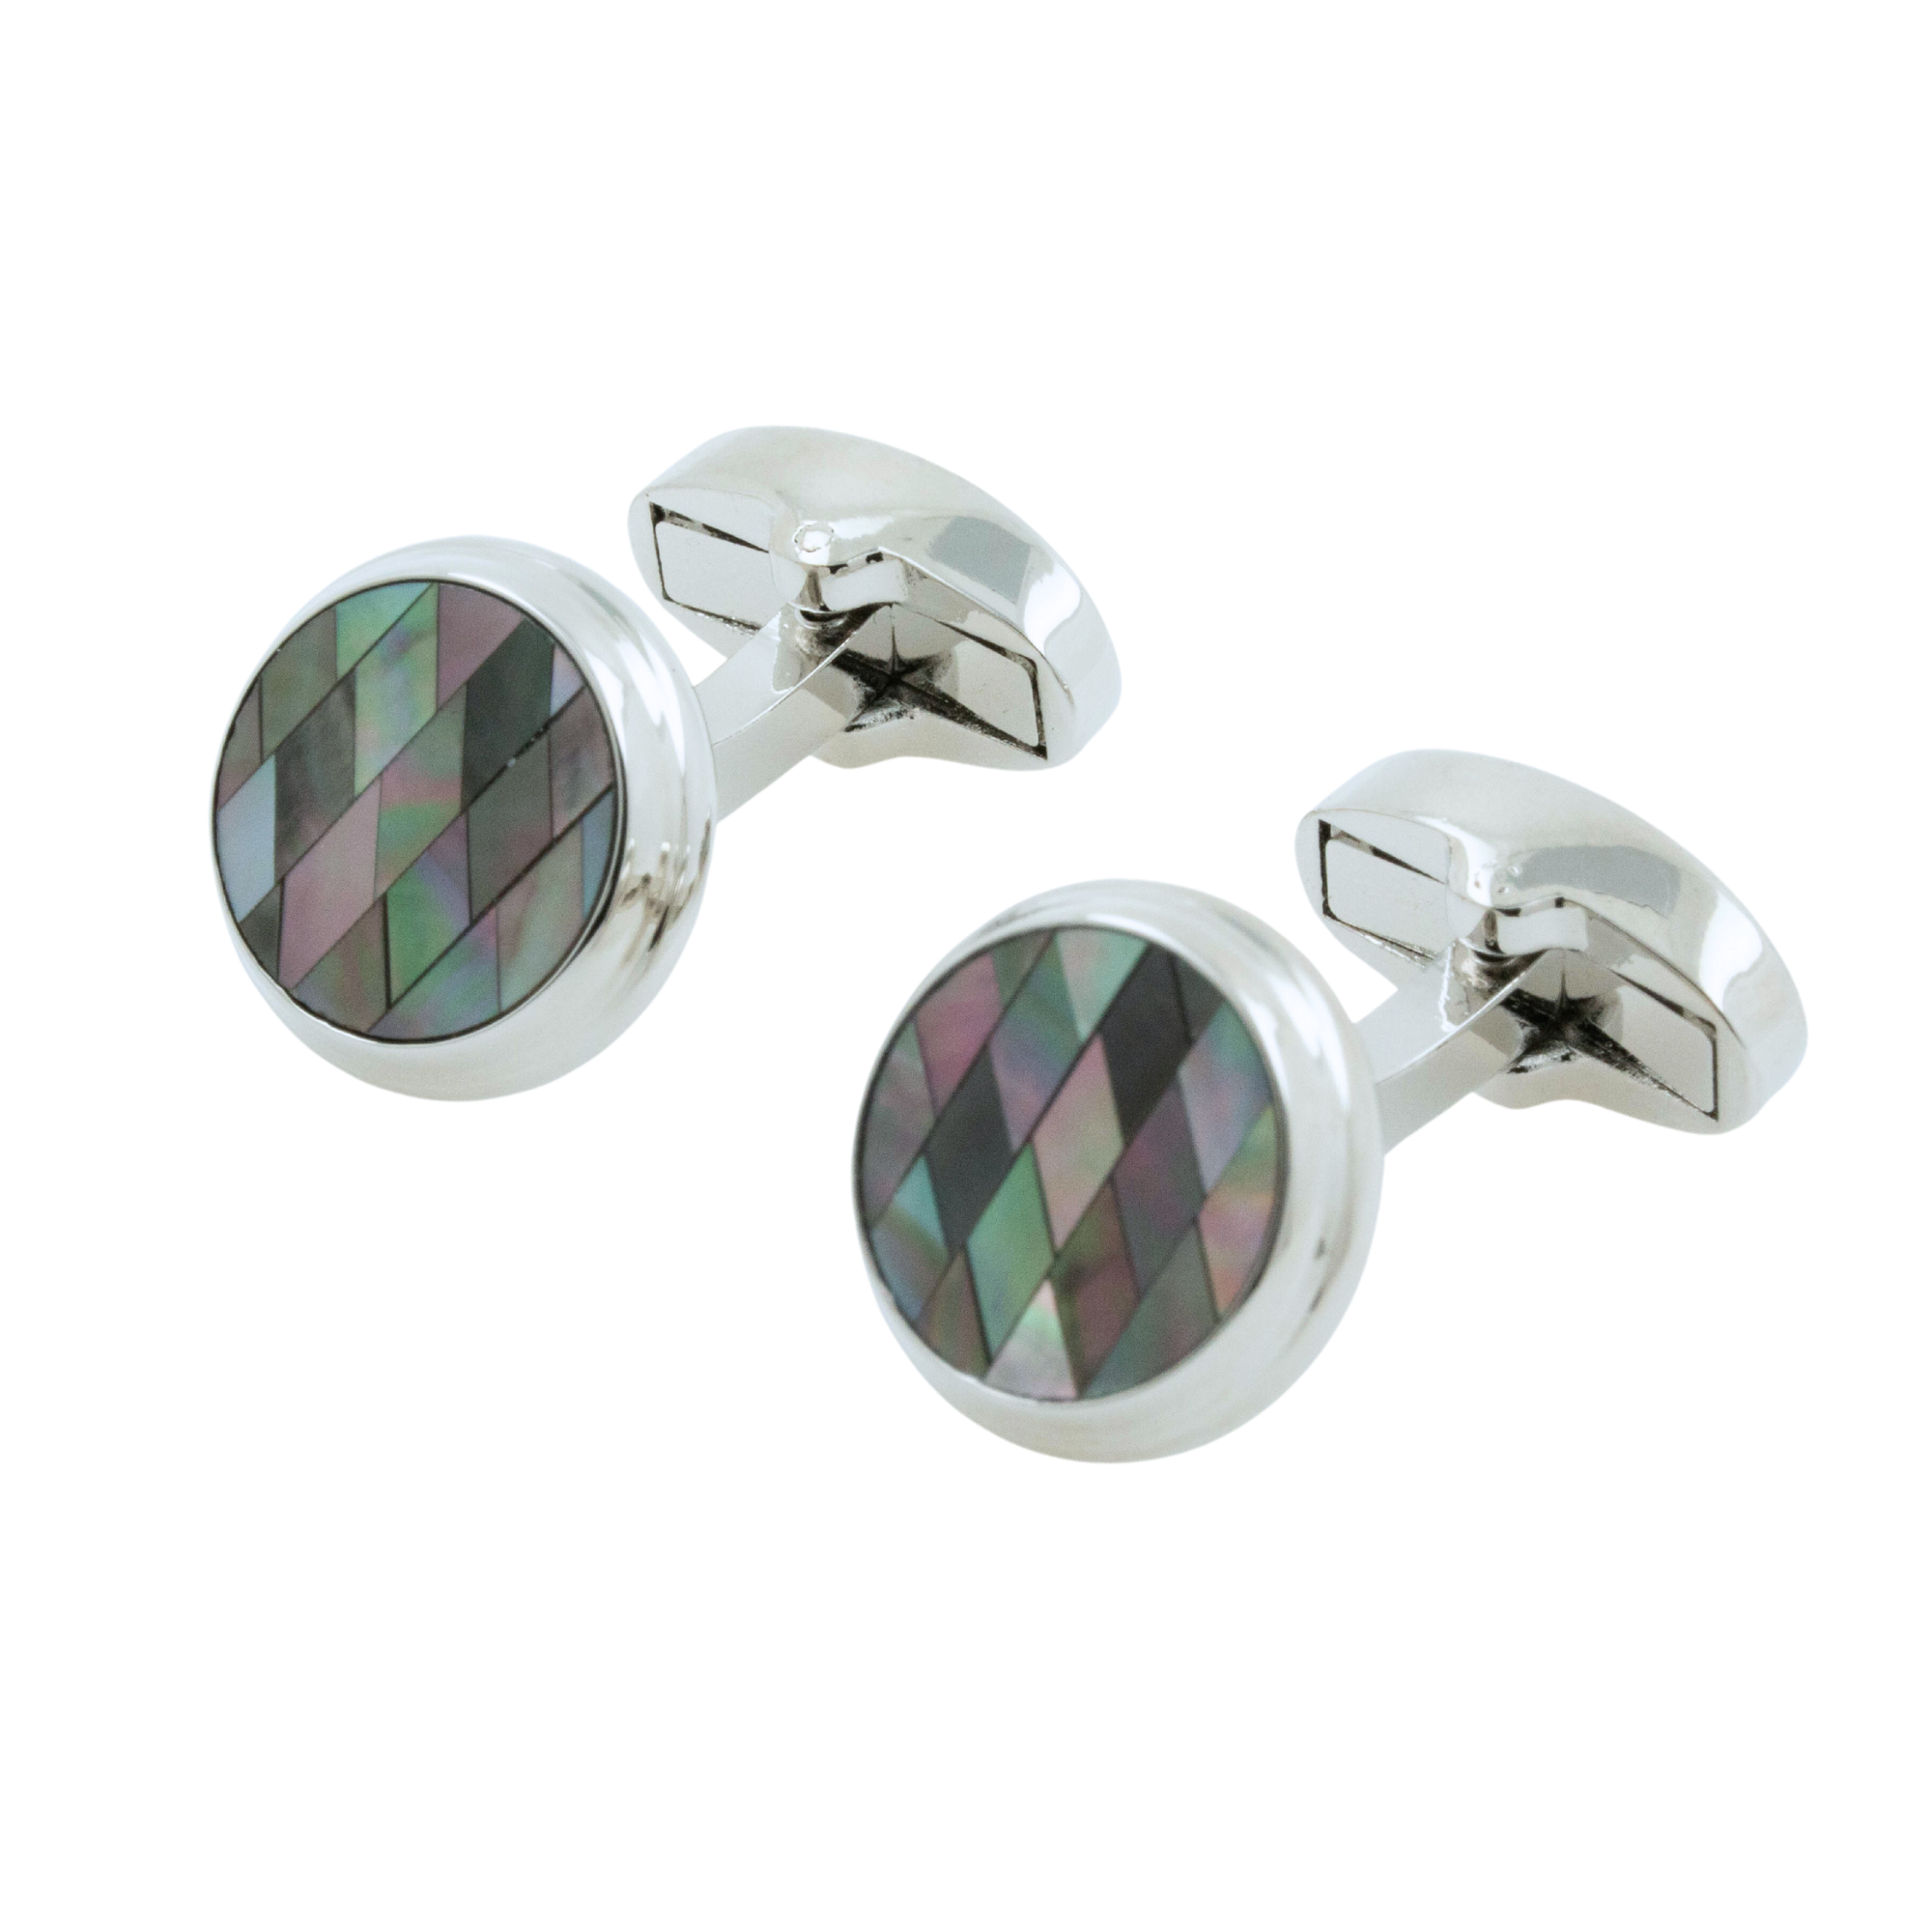 Black Diamond Mosaic Mother of Pearl in Round Silver Cufflinks